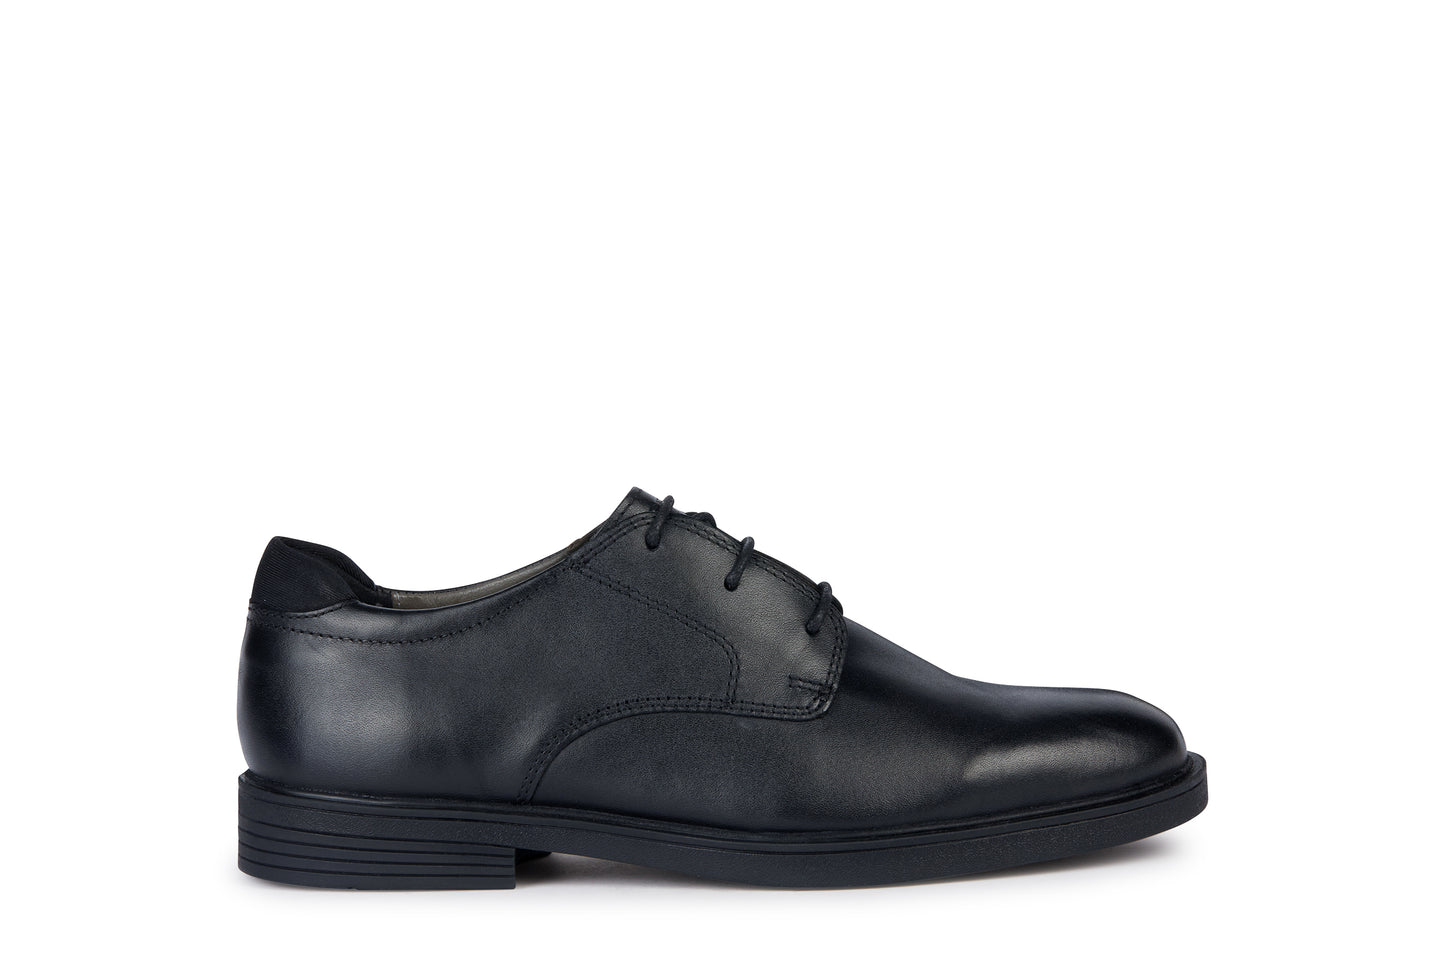 A senior boys school shoe by Geox, style Zheeno, lace-up in black leather. Right side view.